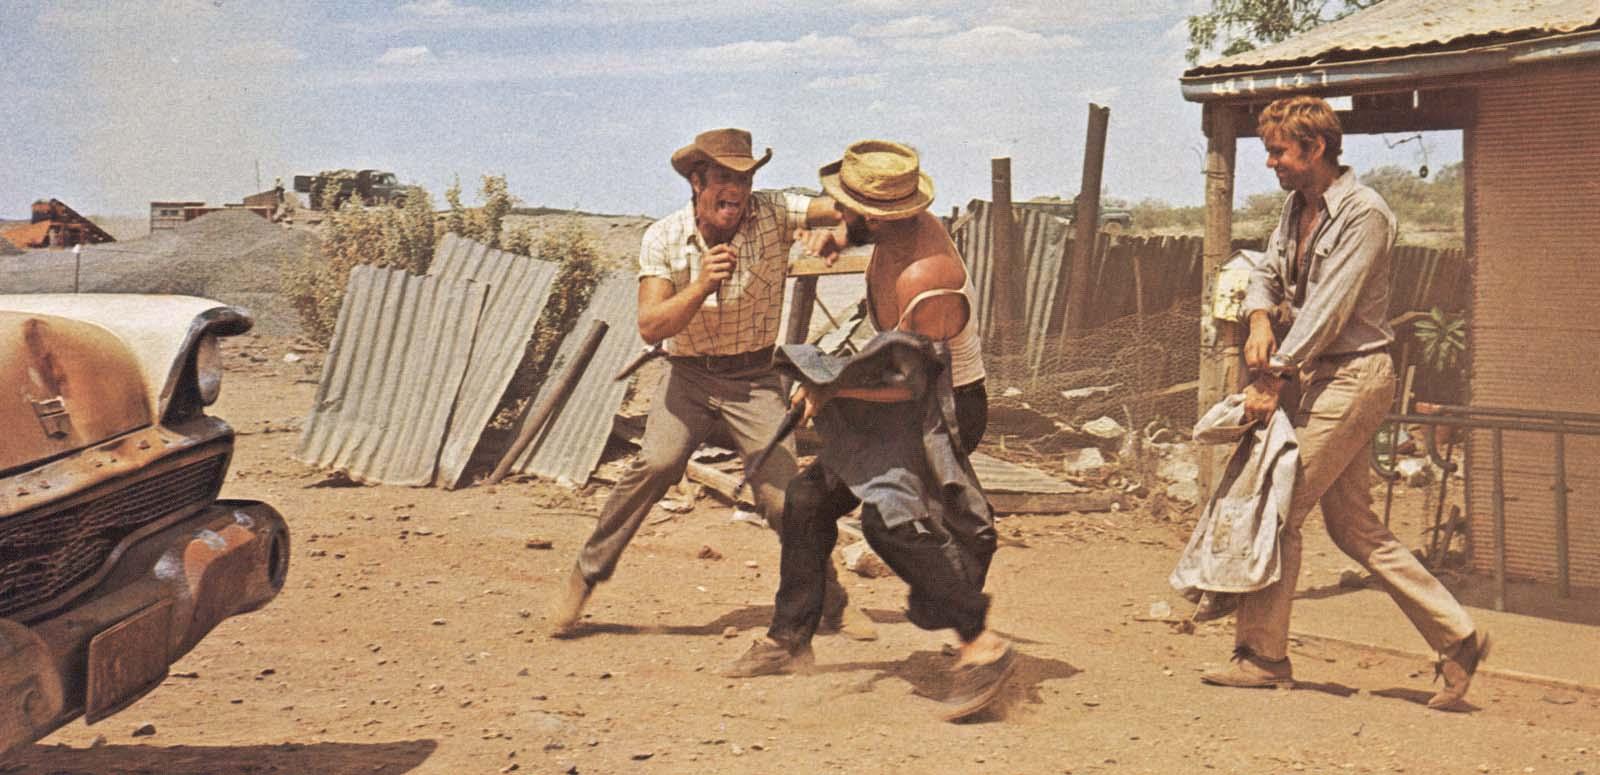 Jack Thompson and Donald Pleasence mock-brawling in the dusty outback while Gary Bond walks towards them